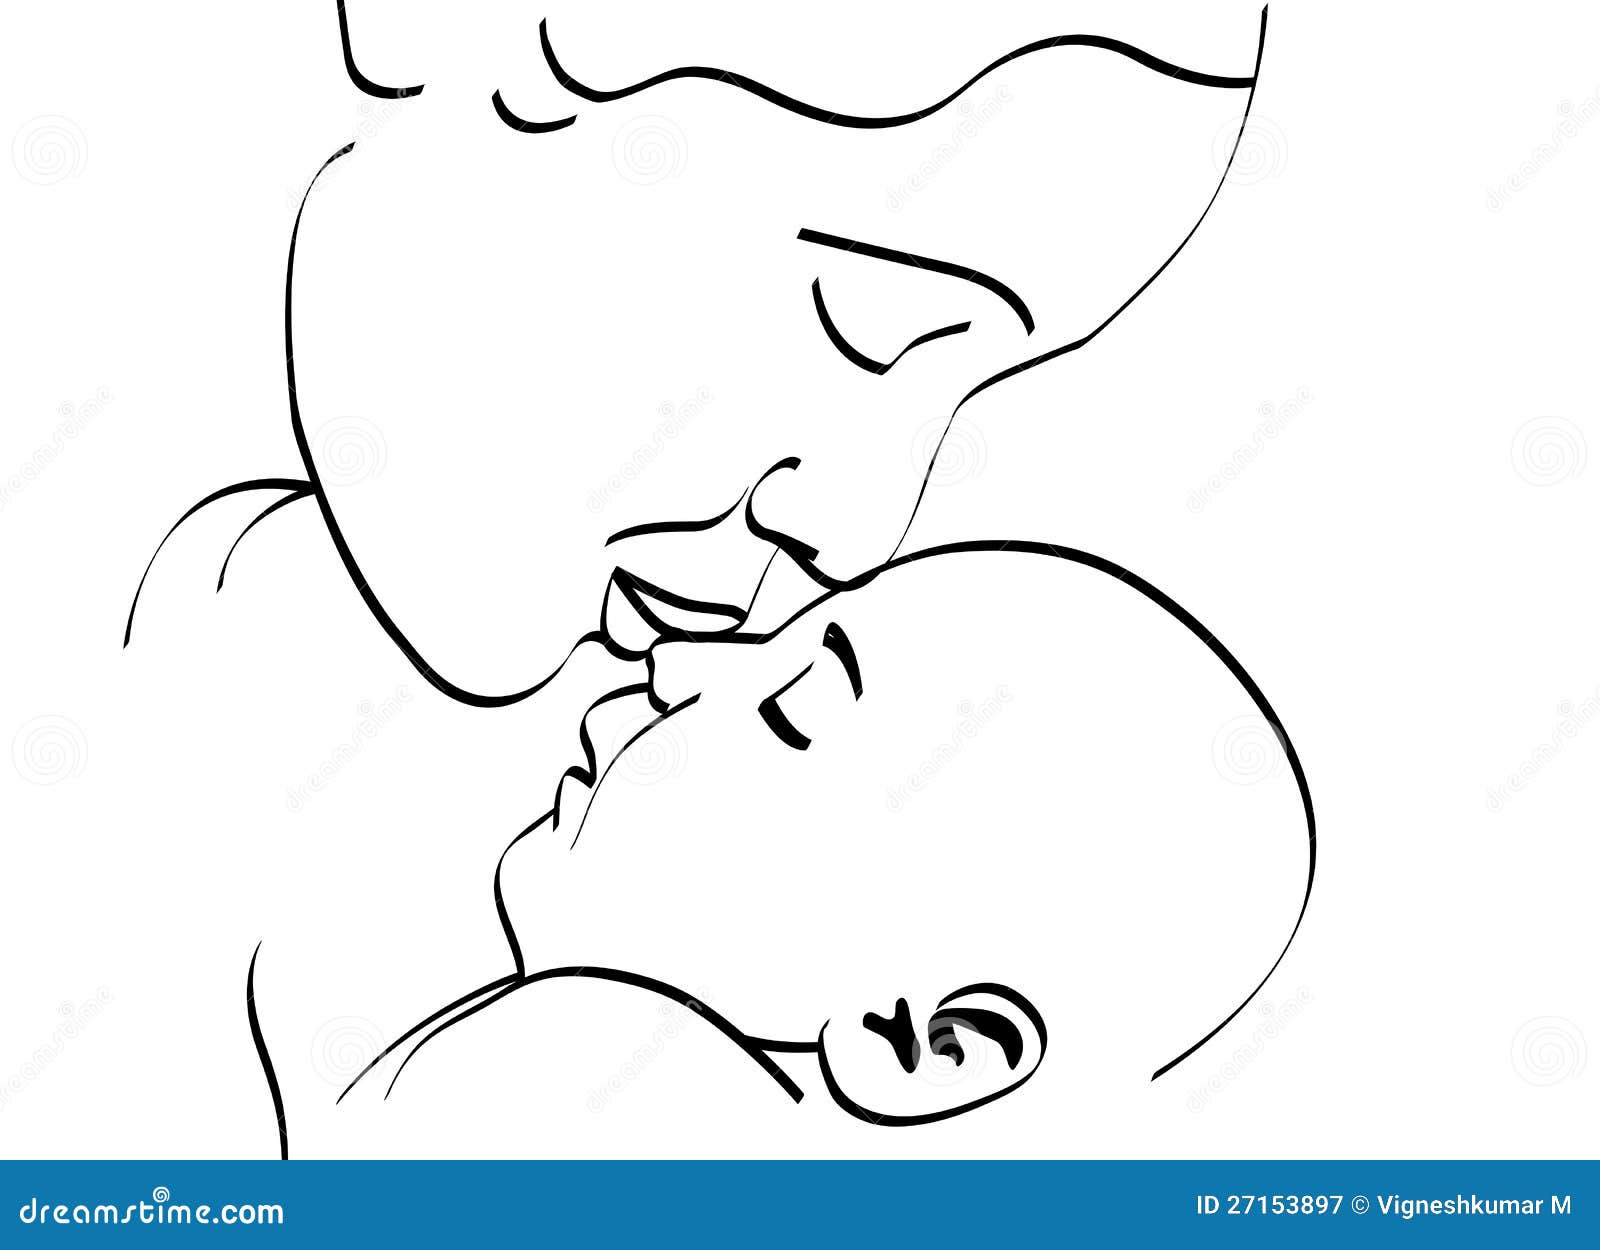 free clipart mother and baby - photo #24